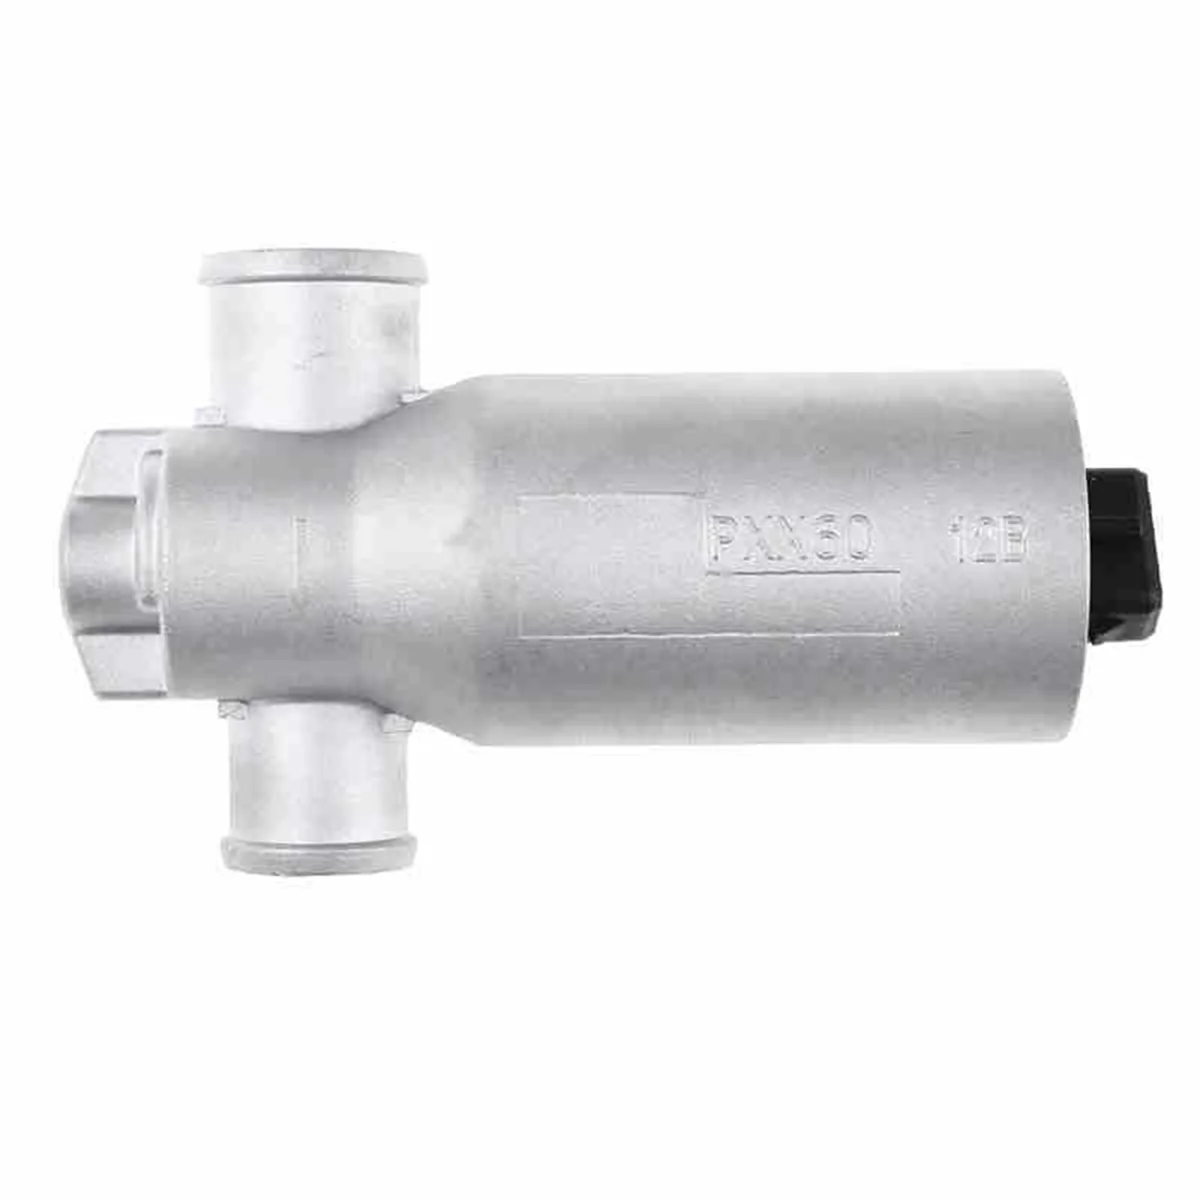 

13411744713 Idle Speed Control Valve Idle Motor Auto for Saab 9-3 Bmw 1341-1738-981/Z